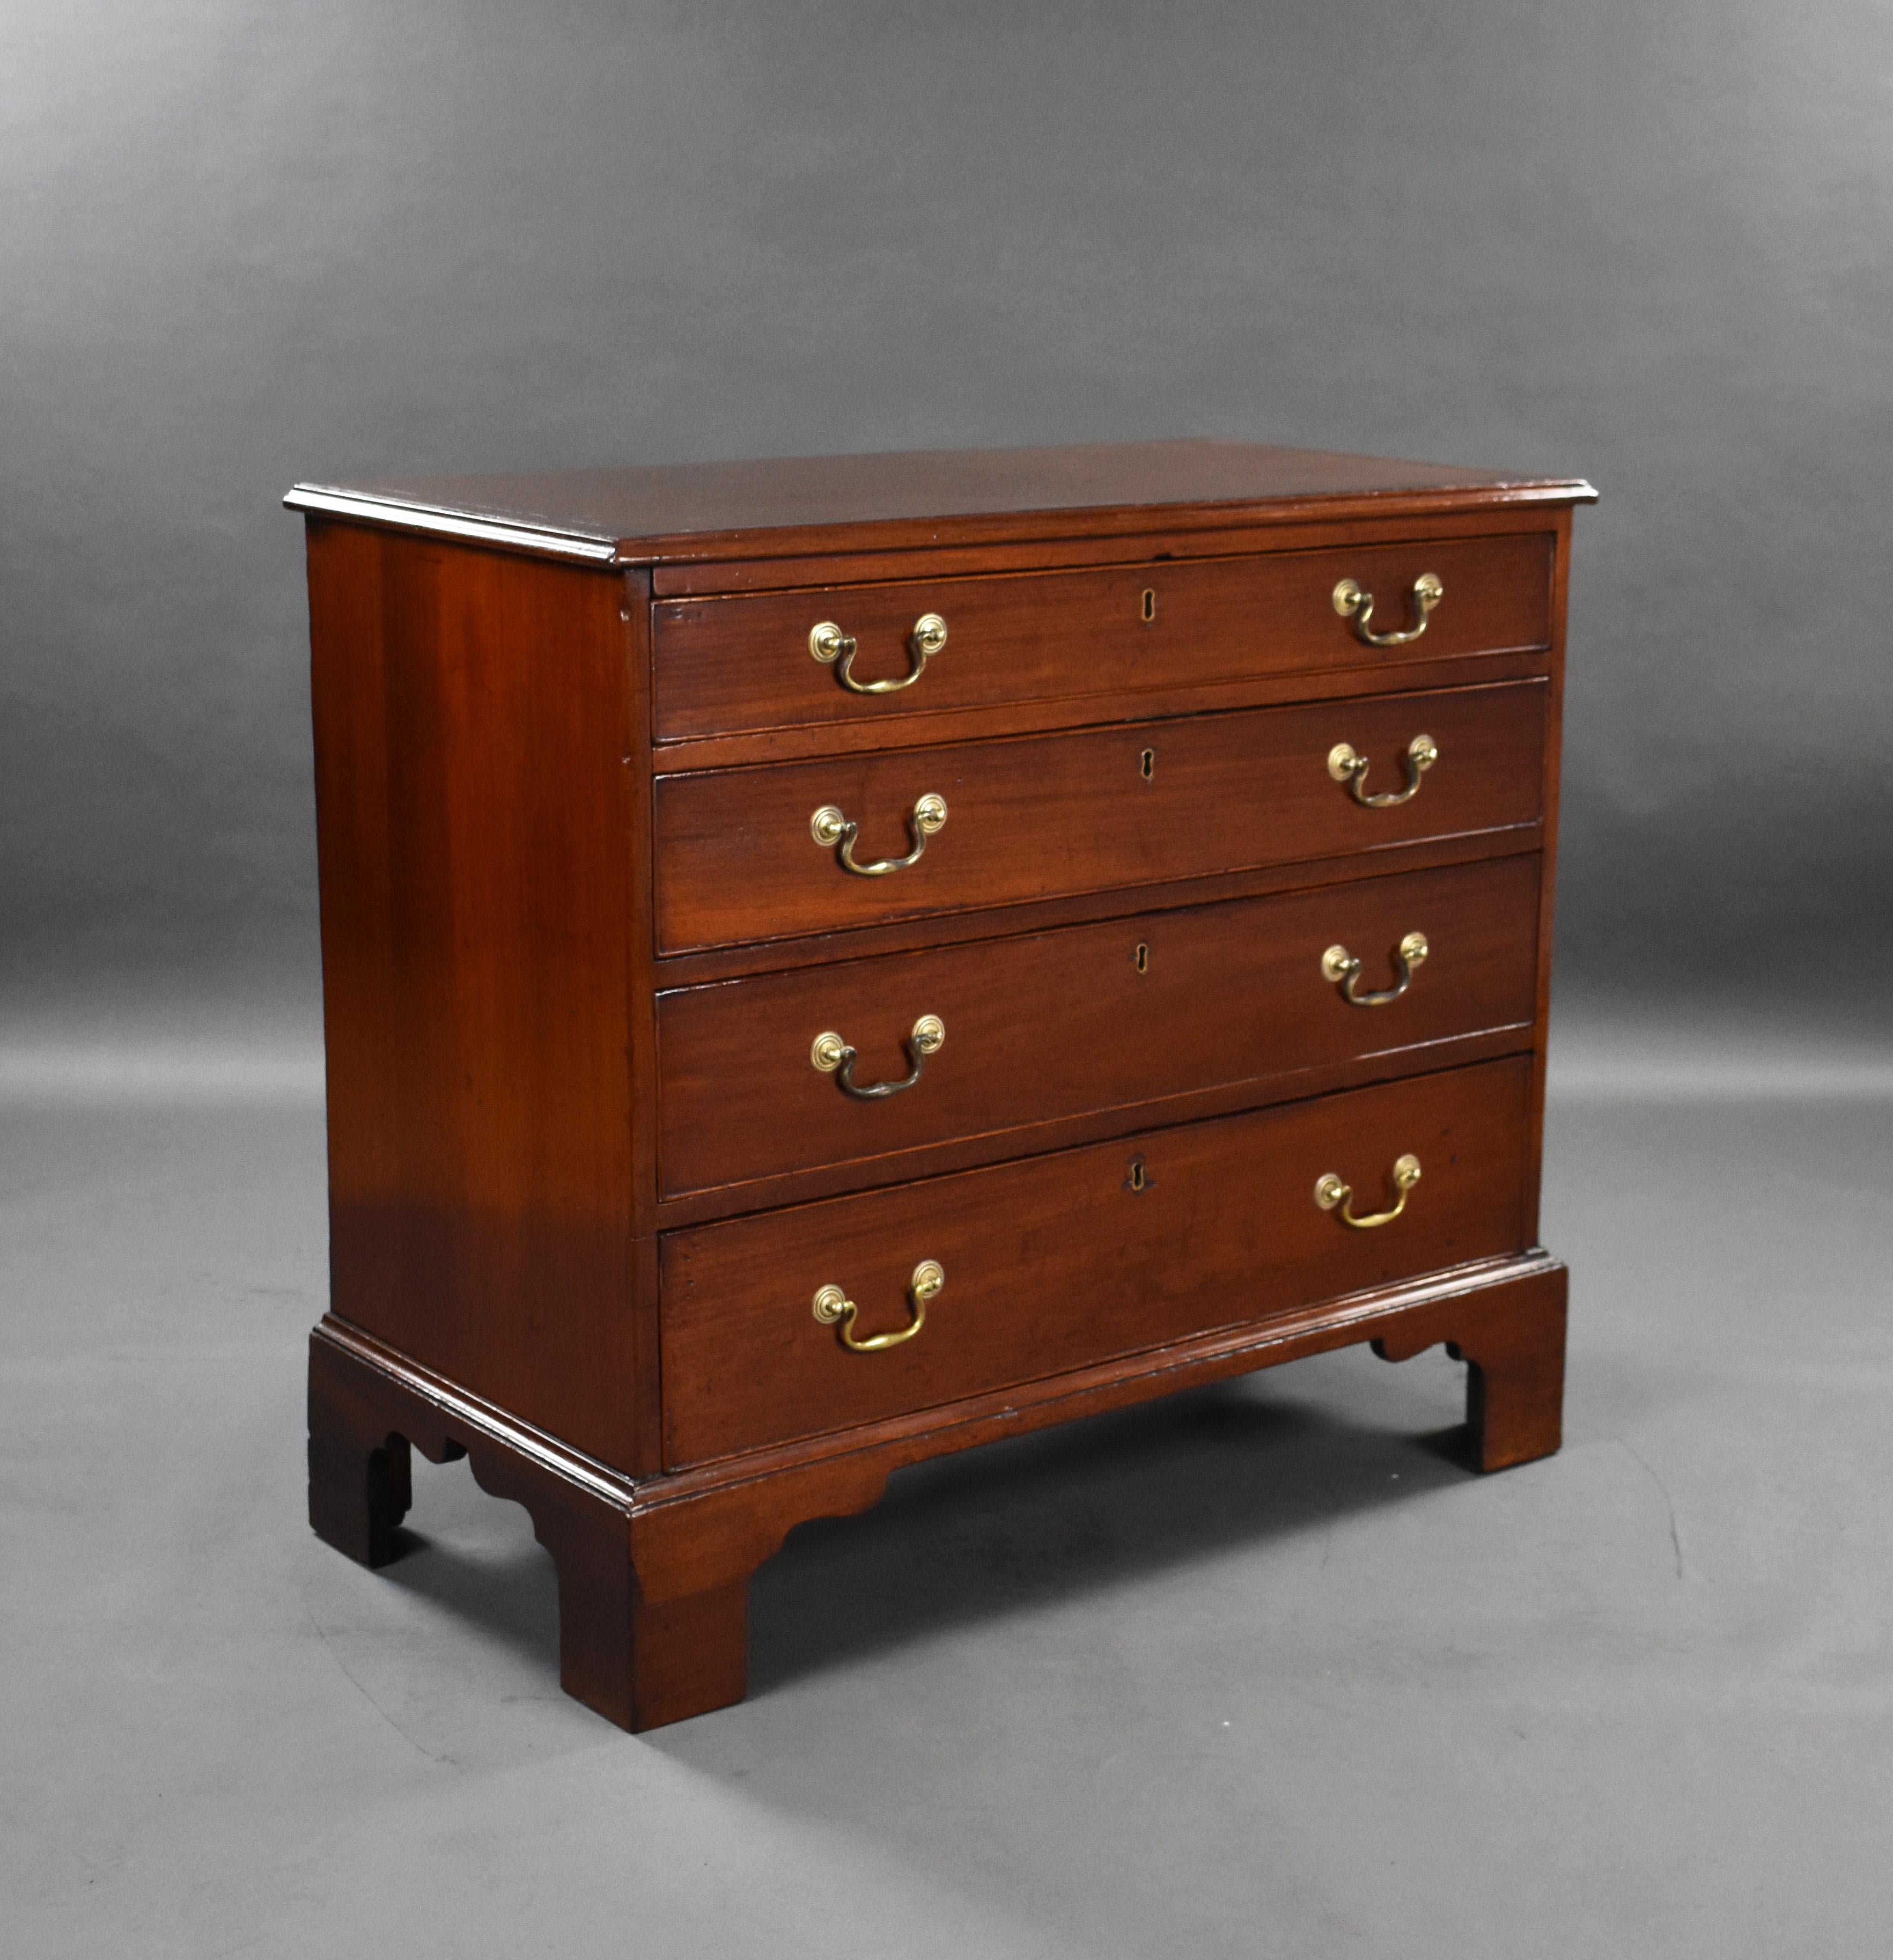 For sale is a good quality George III mahogany chest of drawers, having an arrangement of four graduated drawers, each with brass handles. The chest stands on bracket feet and is in very good condition for its age. 

Measures: width: 95cm, depth: